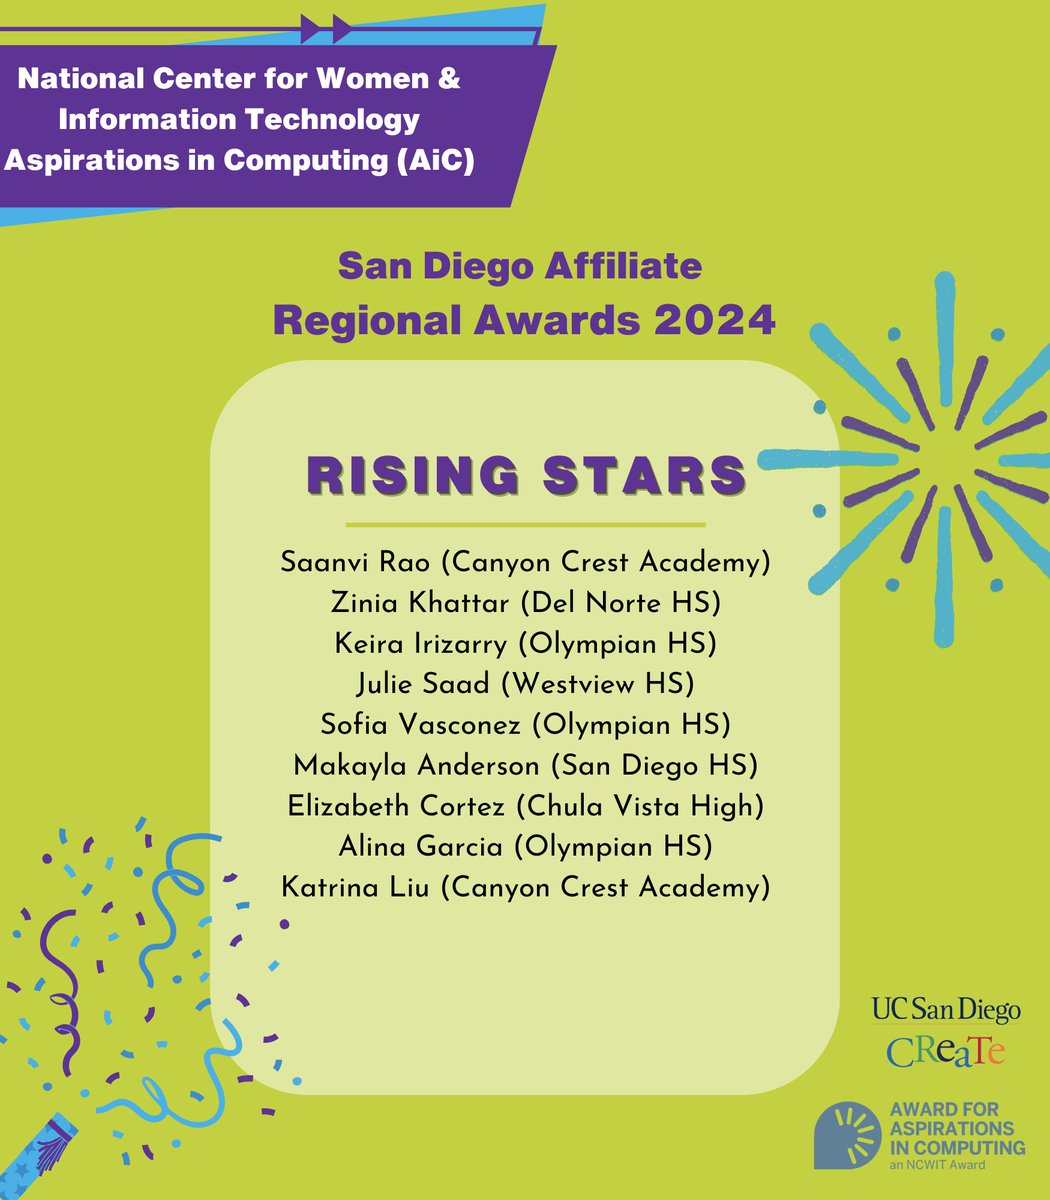 Congratulations! As the NCWIT AiC San Diego Affiliate, CREATE at UC San Diego is proud to honor your dedication and outstanding achievements in CS and tech clubs. Let's celebrate this incredible accomplishment together! 🚀 #NCWITAiC #WomenInTech #CREATEUCSD #CSforAll